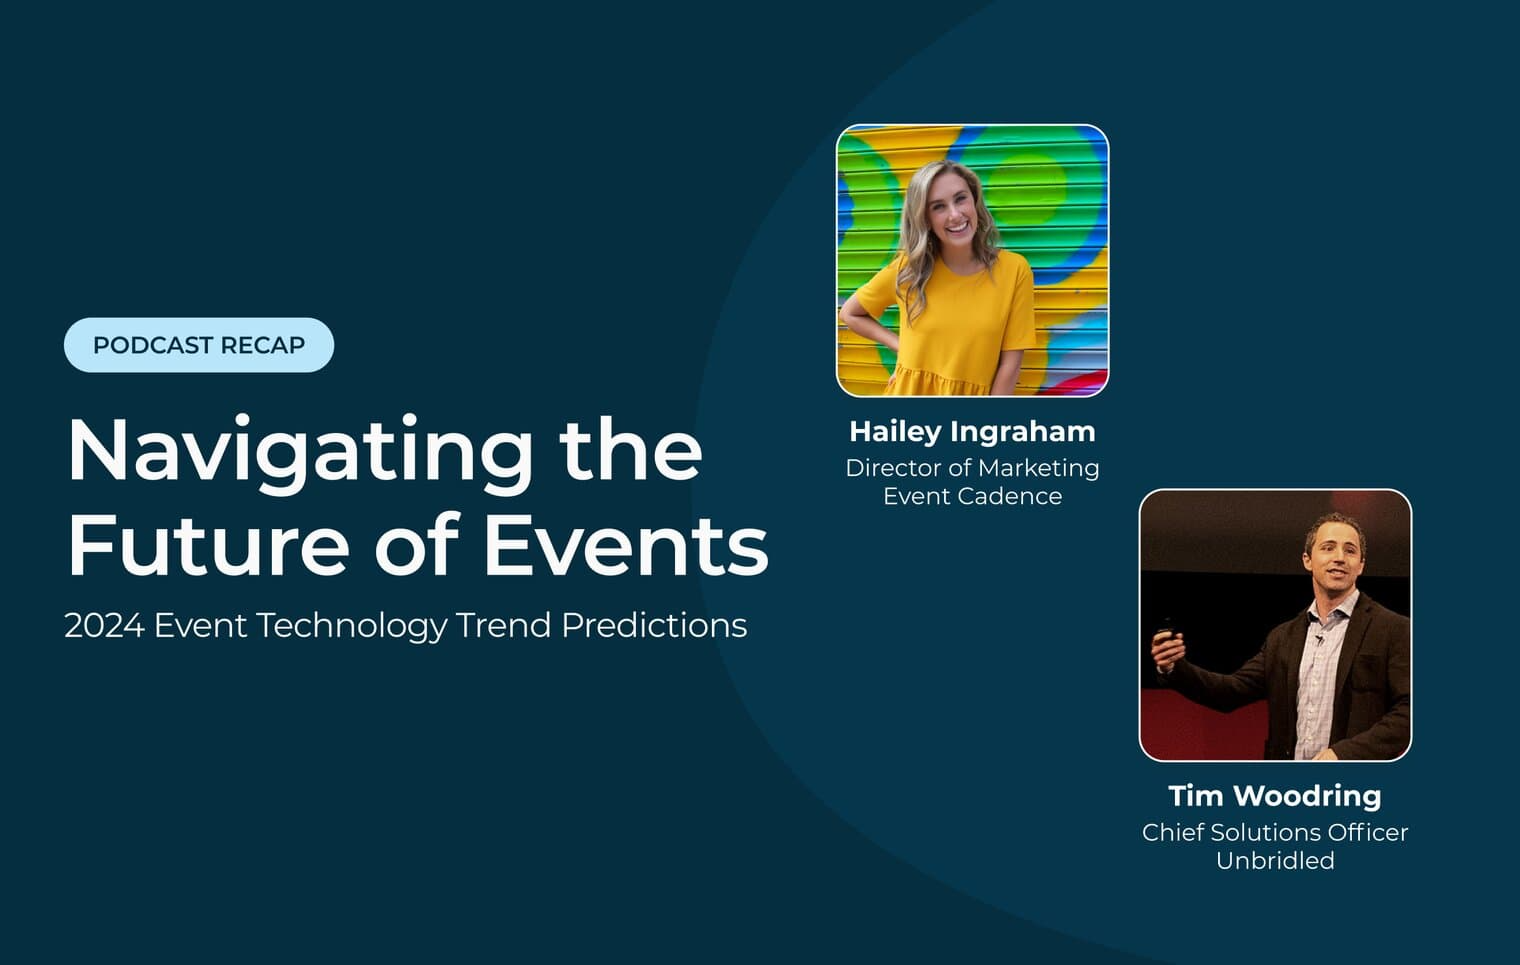 Navigating the Future of Events: A Deep Dive into 2024 Event Technology Trend Predictions